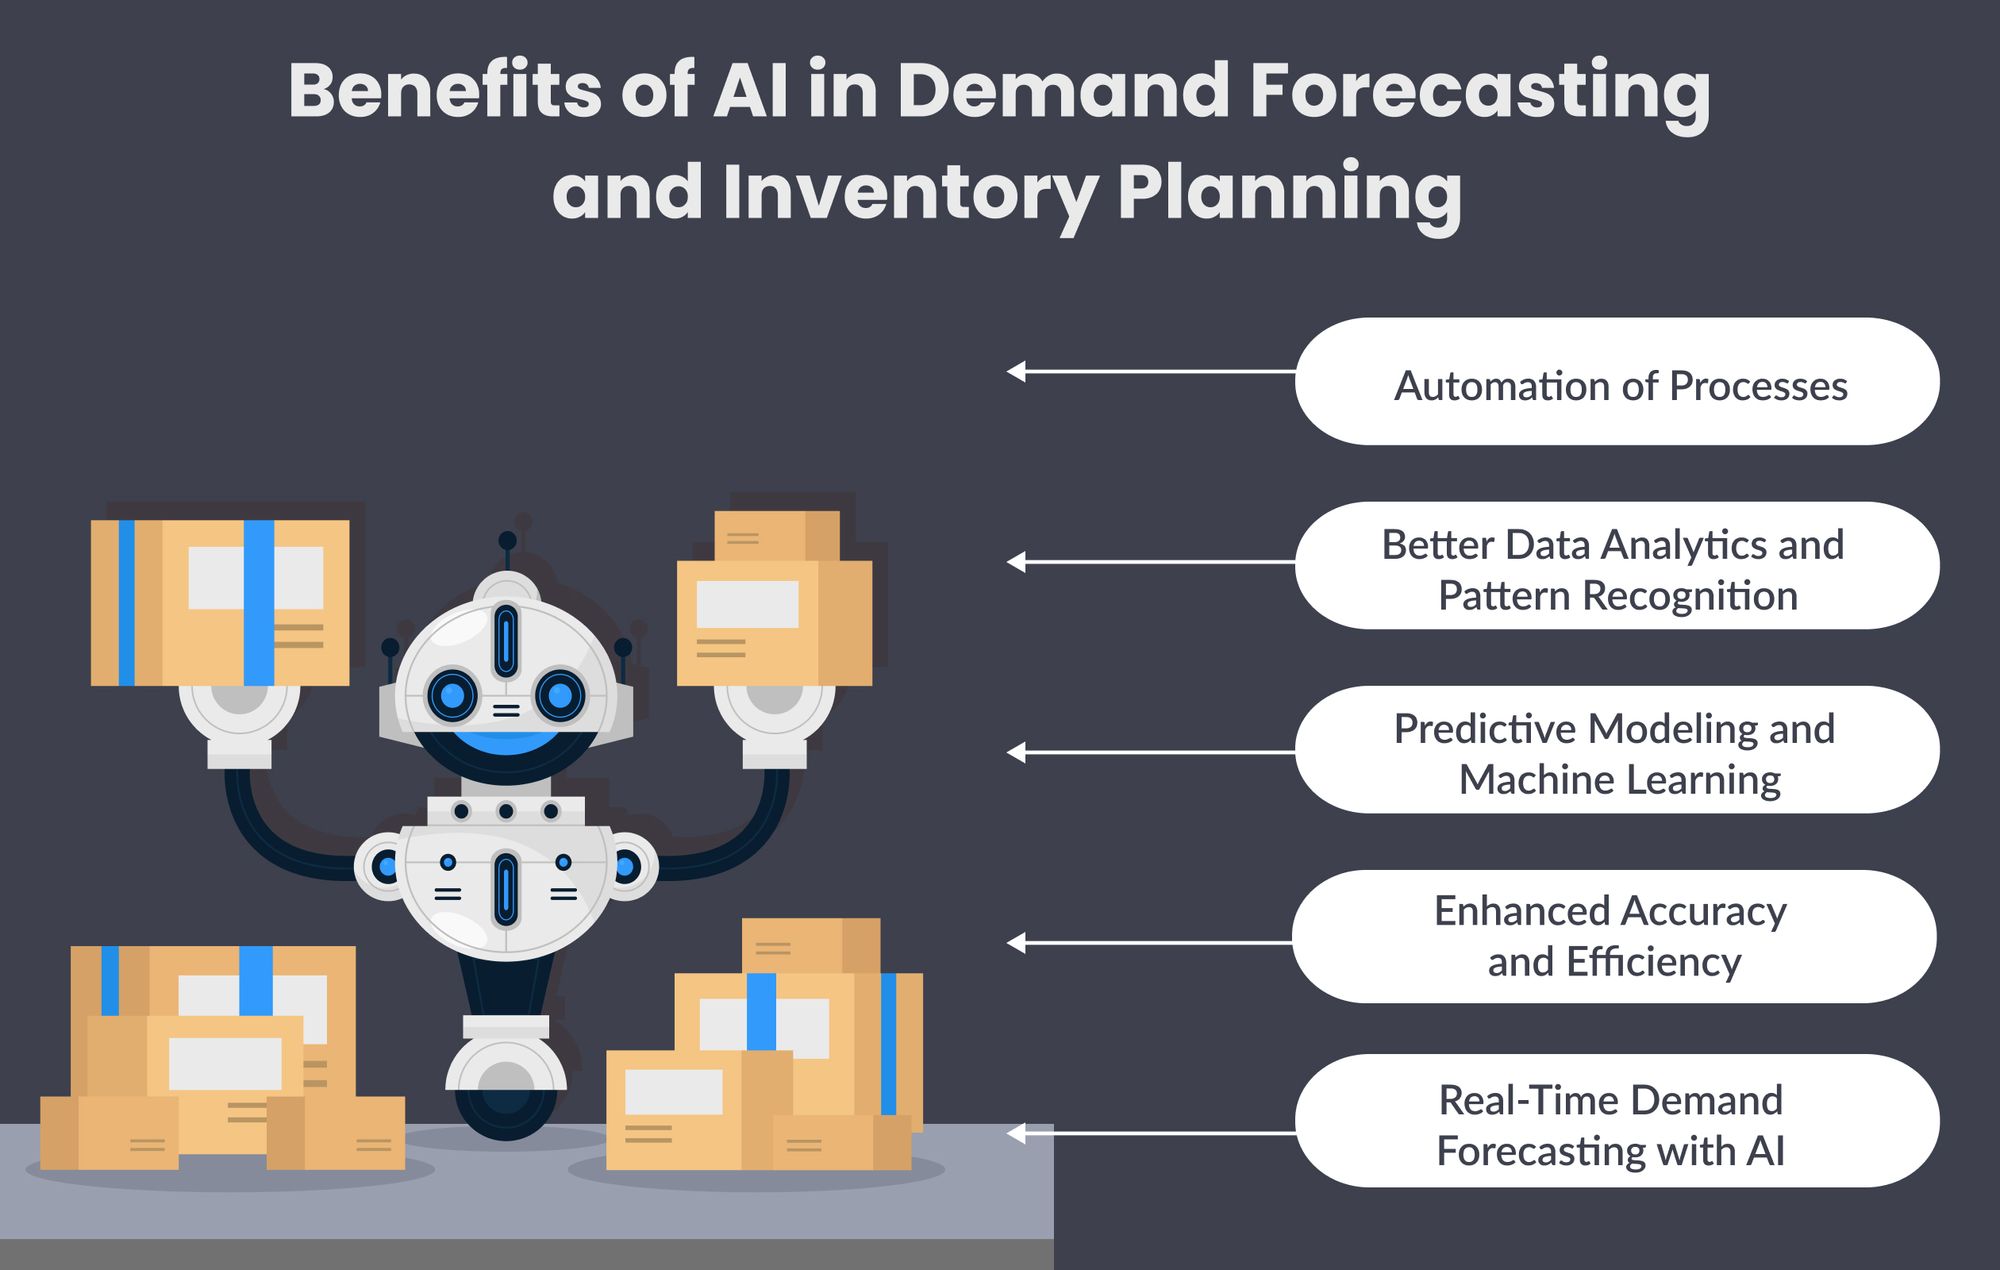 Benefits of AI in Demand Forecasting and Inventory Planning